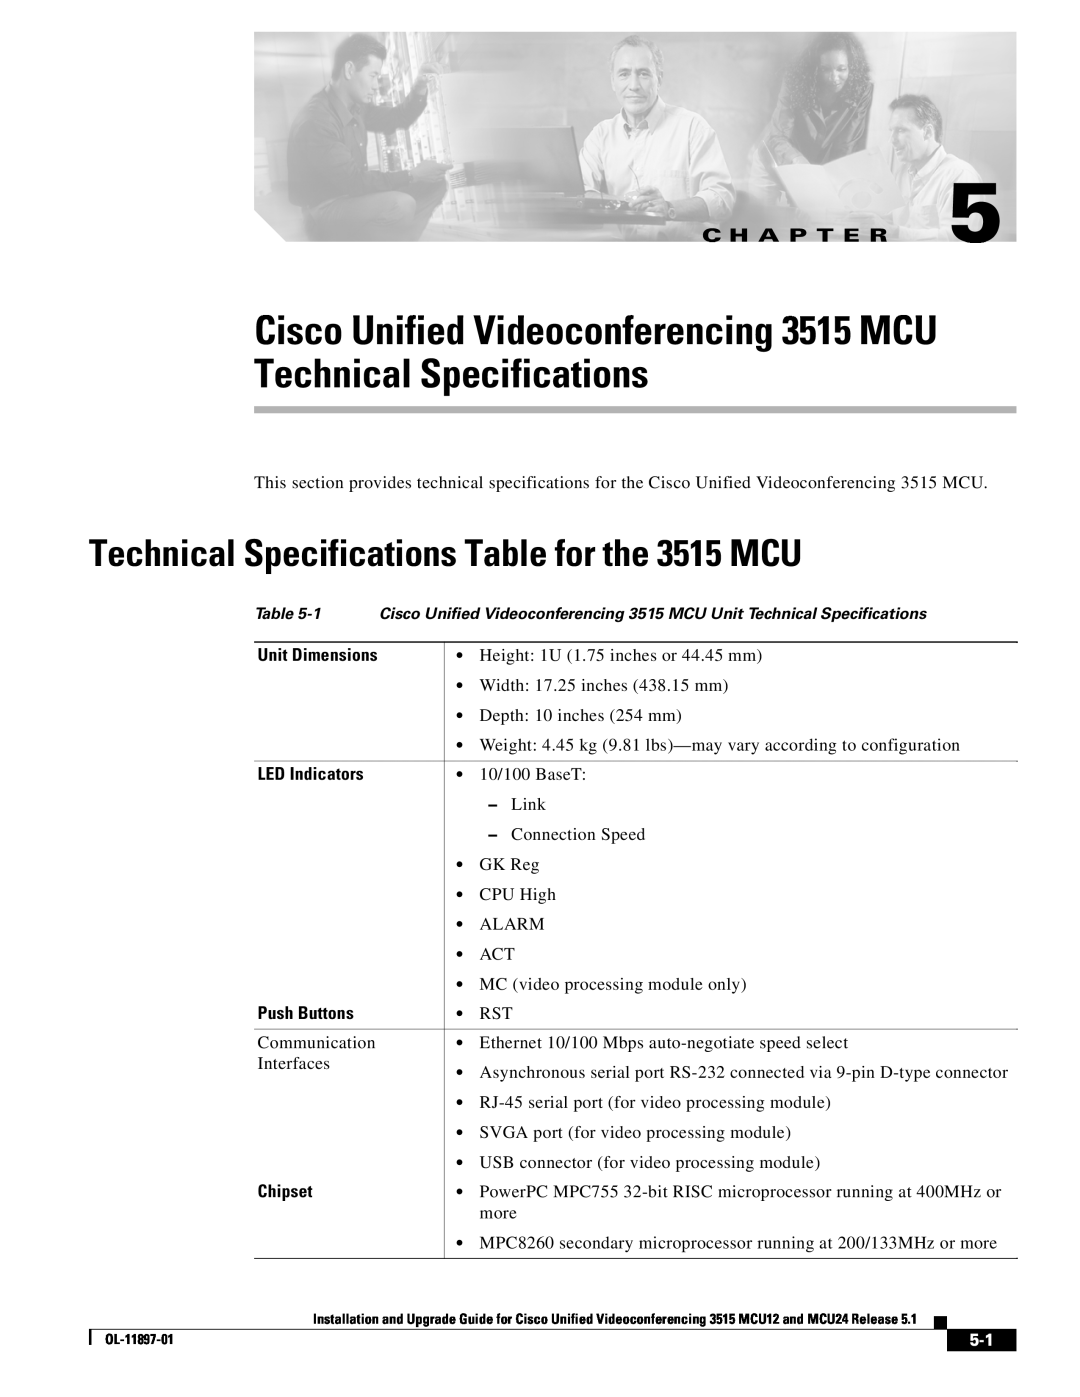 Cisco Systems MCU24 manual Cisco Unified Videoconferencing 3515 MCU Technical Specifications, C H A P T E R 